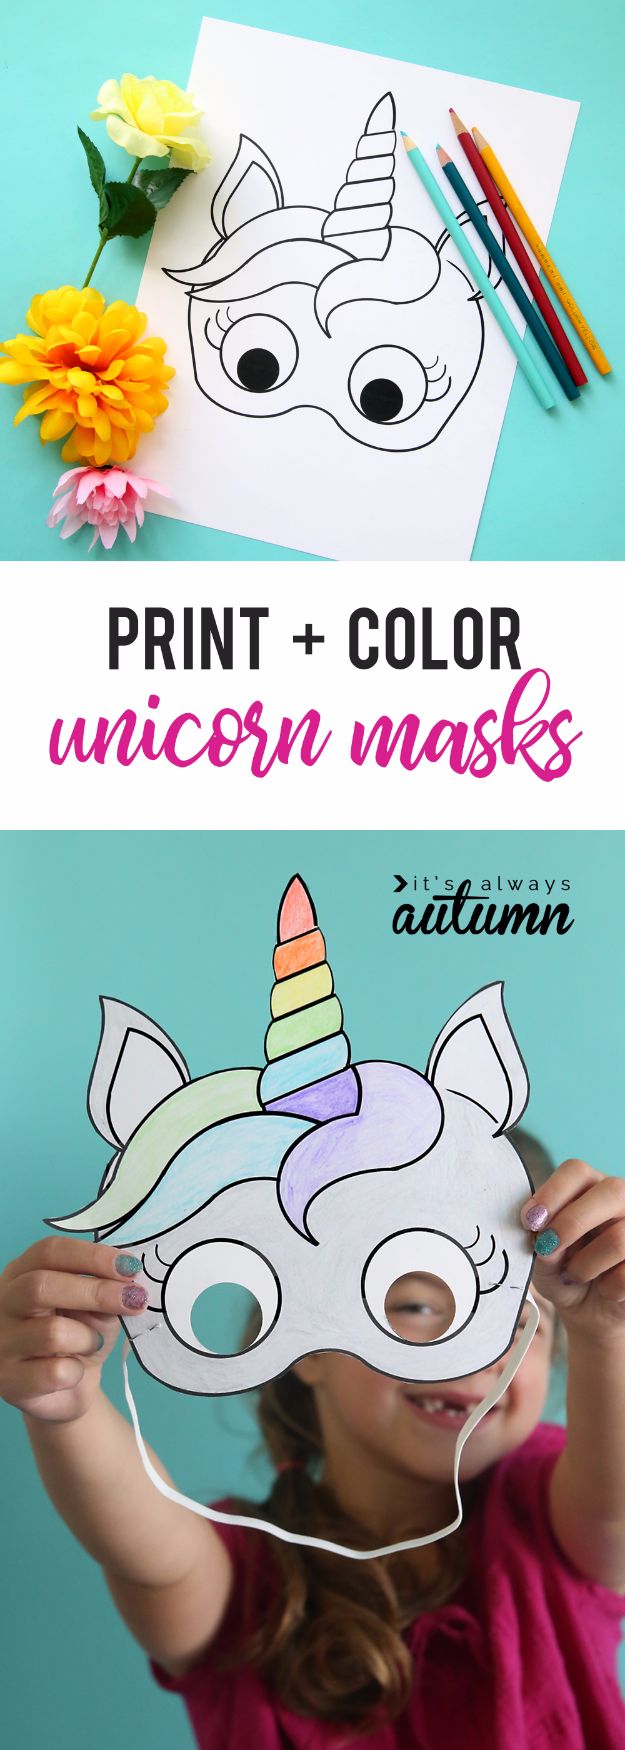 DIY Ideas With Unicorns - Unicorn Masks - Cute and Easy DIY Projects for Unicorn Lovers - Wall and Home Decor Projects, Things To Make and Sell on Etsy - Quick Gifts to Make for Friends and Family - Homemade No Sew Projects and Pillows - Fun Jewelry, Desk Decor Cool Clothes and Accessories